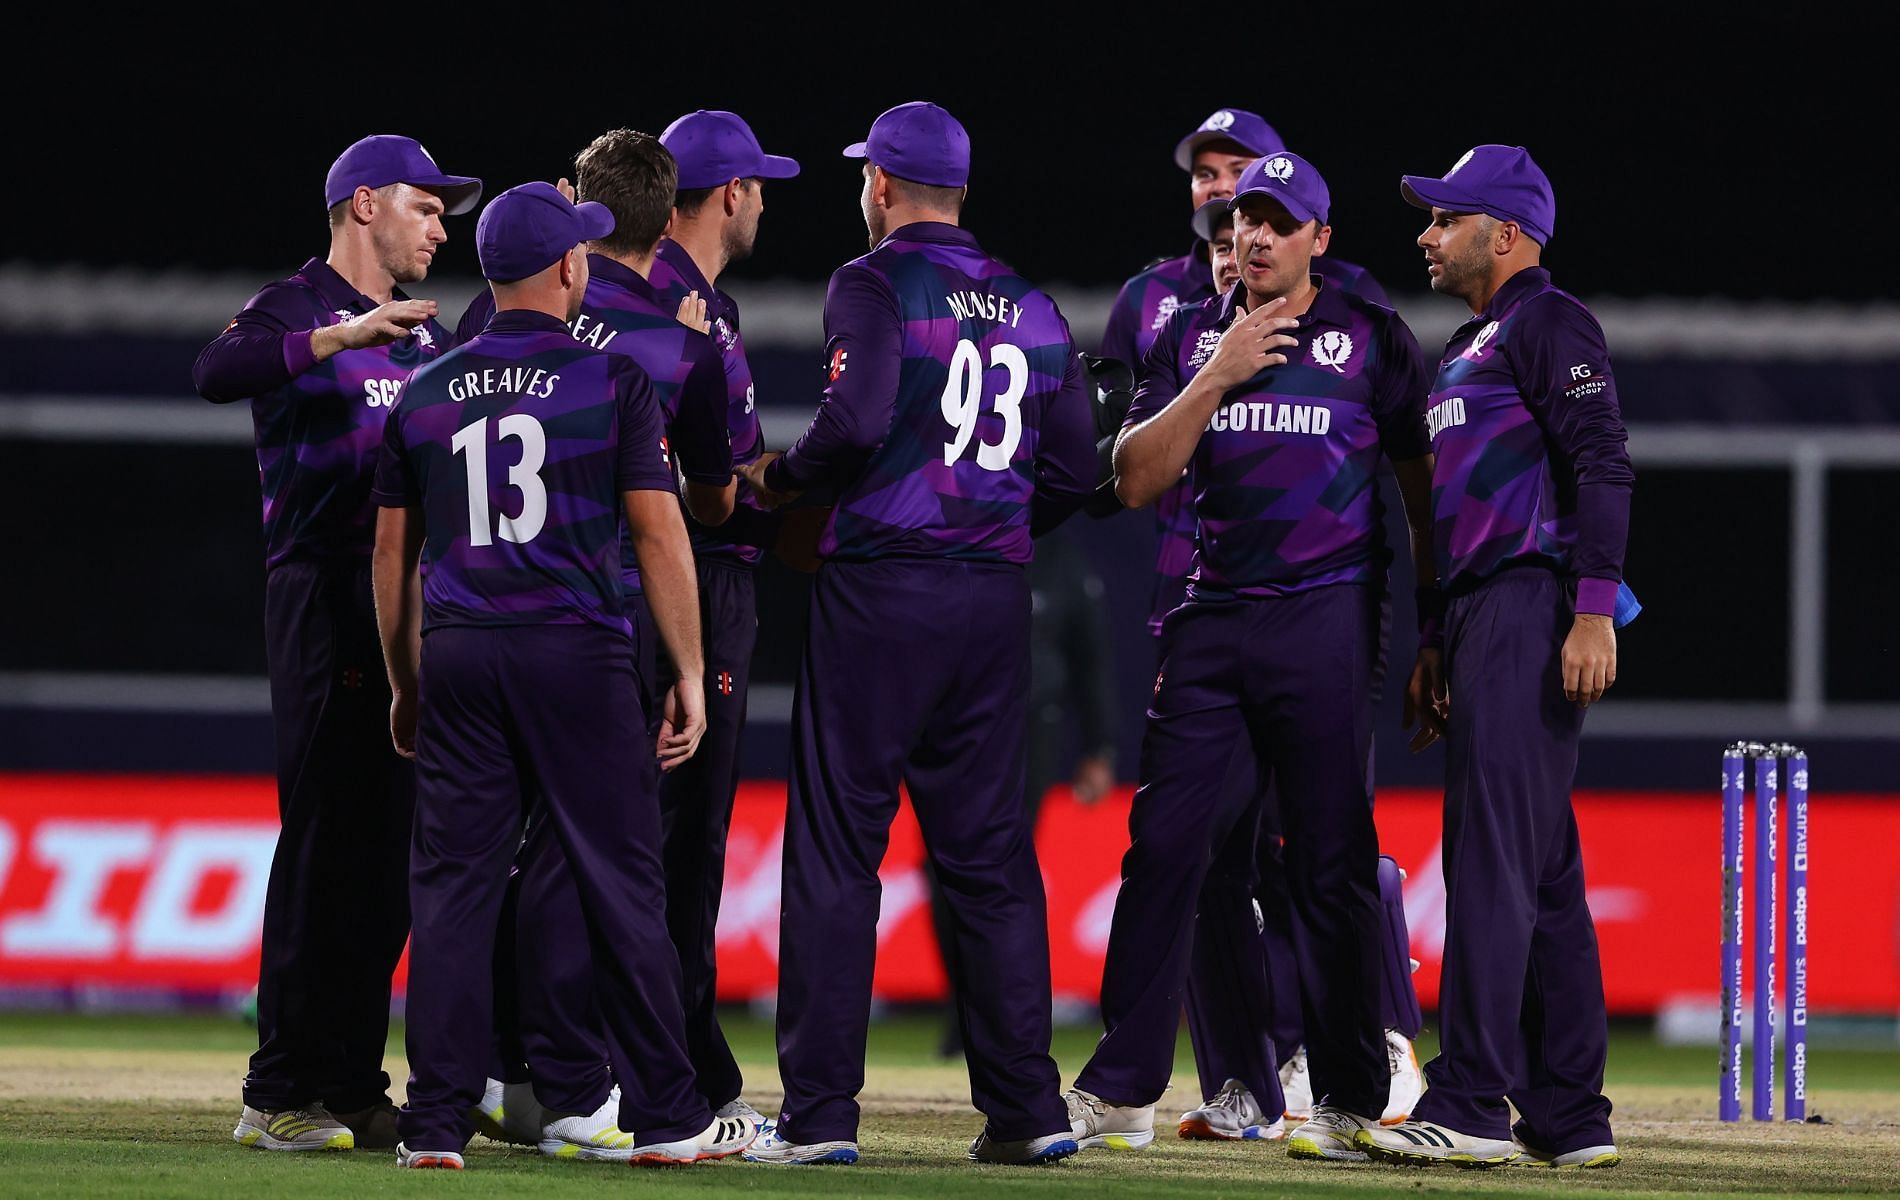 Scotland opened their T20 World Cup 2021 campaign with a win against Bangladesh.